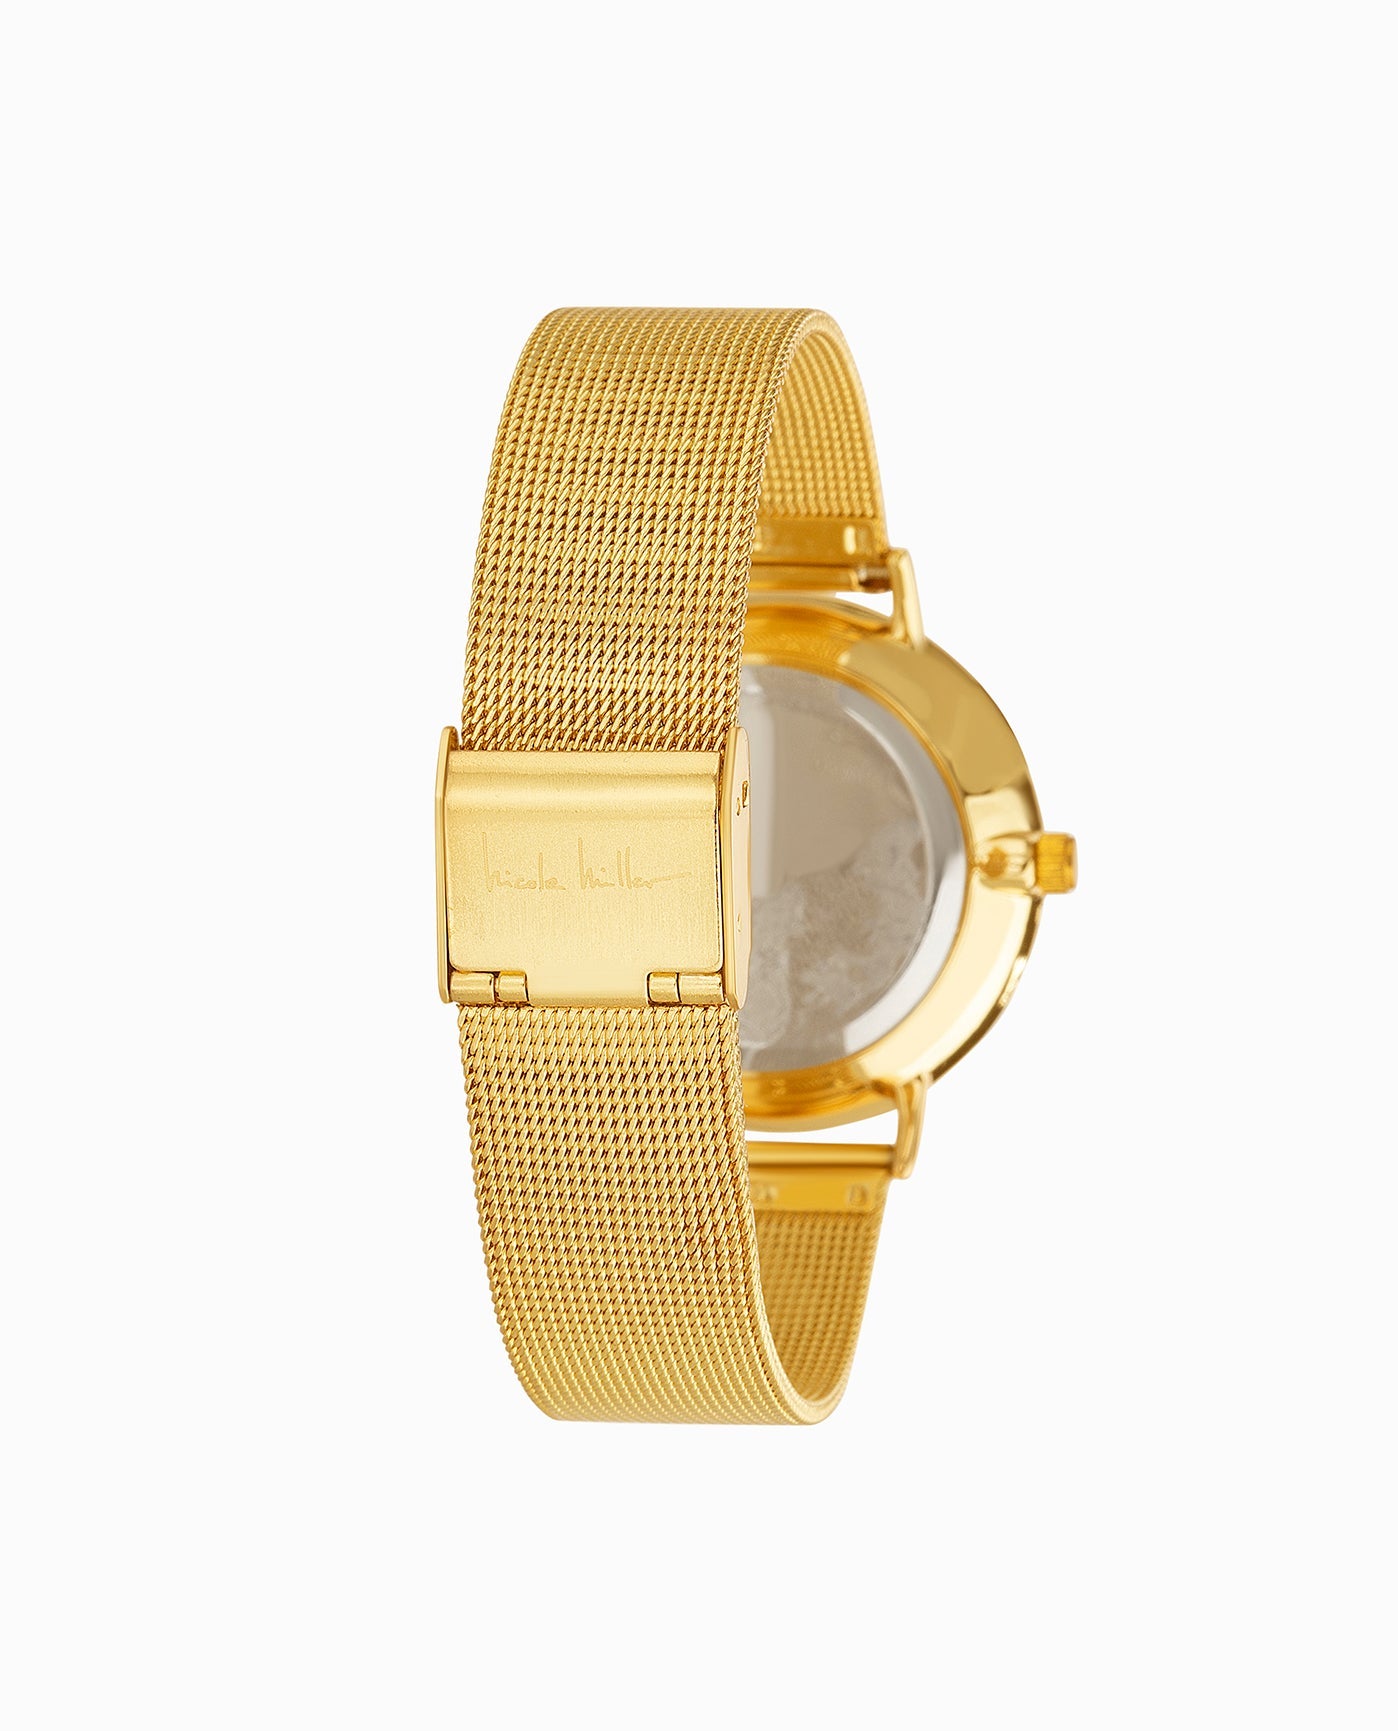 STAINLESS STEEL BRACELET WATCH, 35mm BAND CLOSE UP | Gold